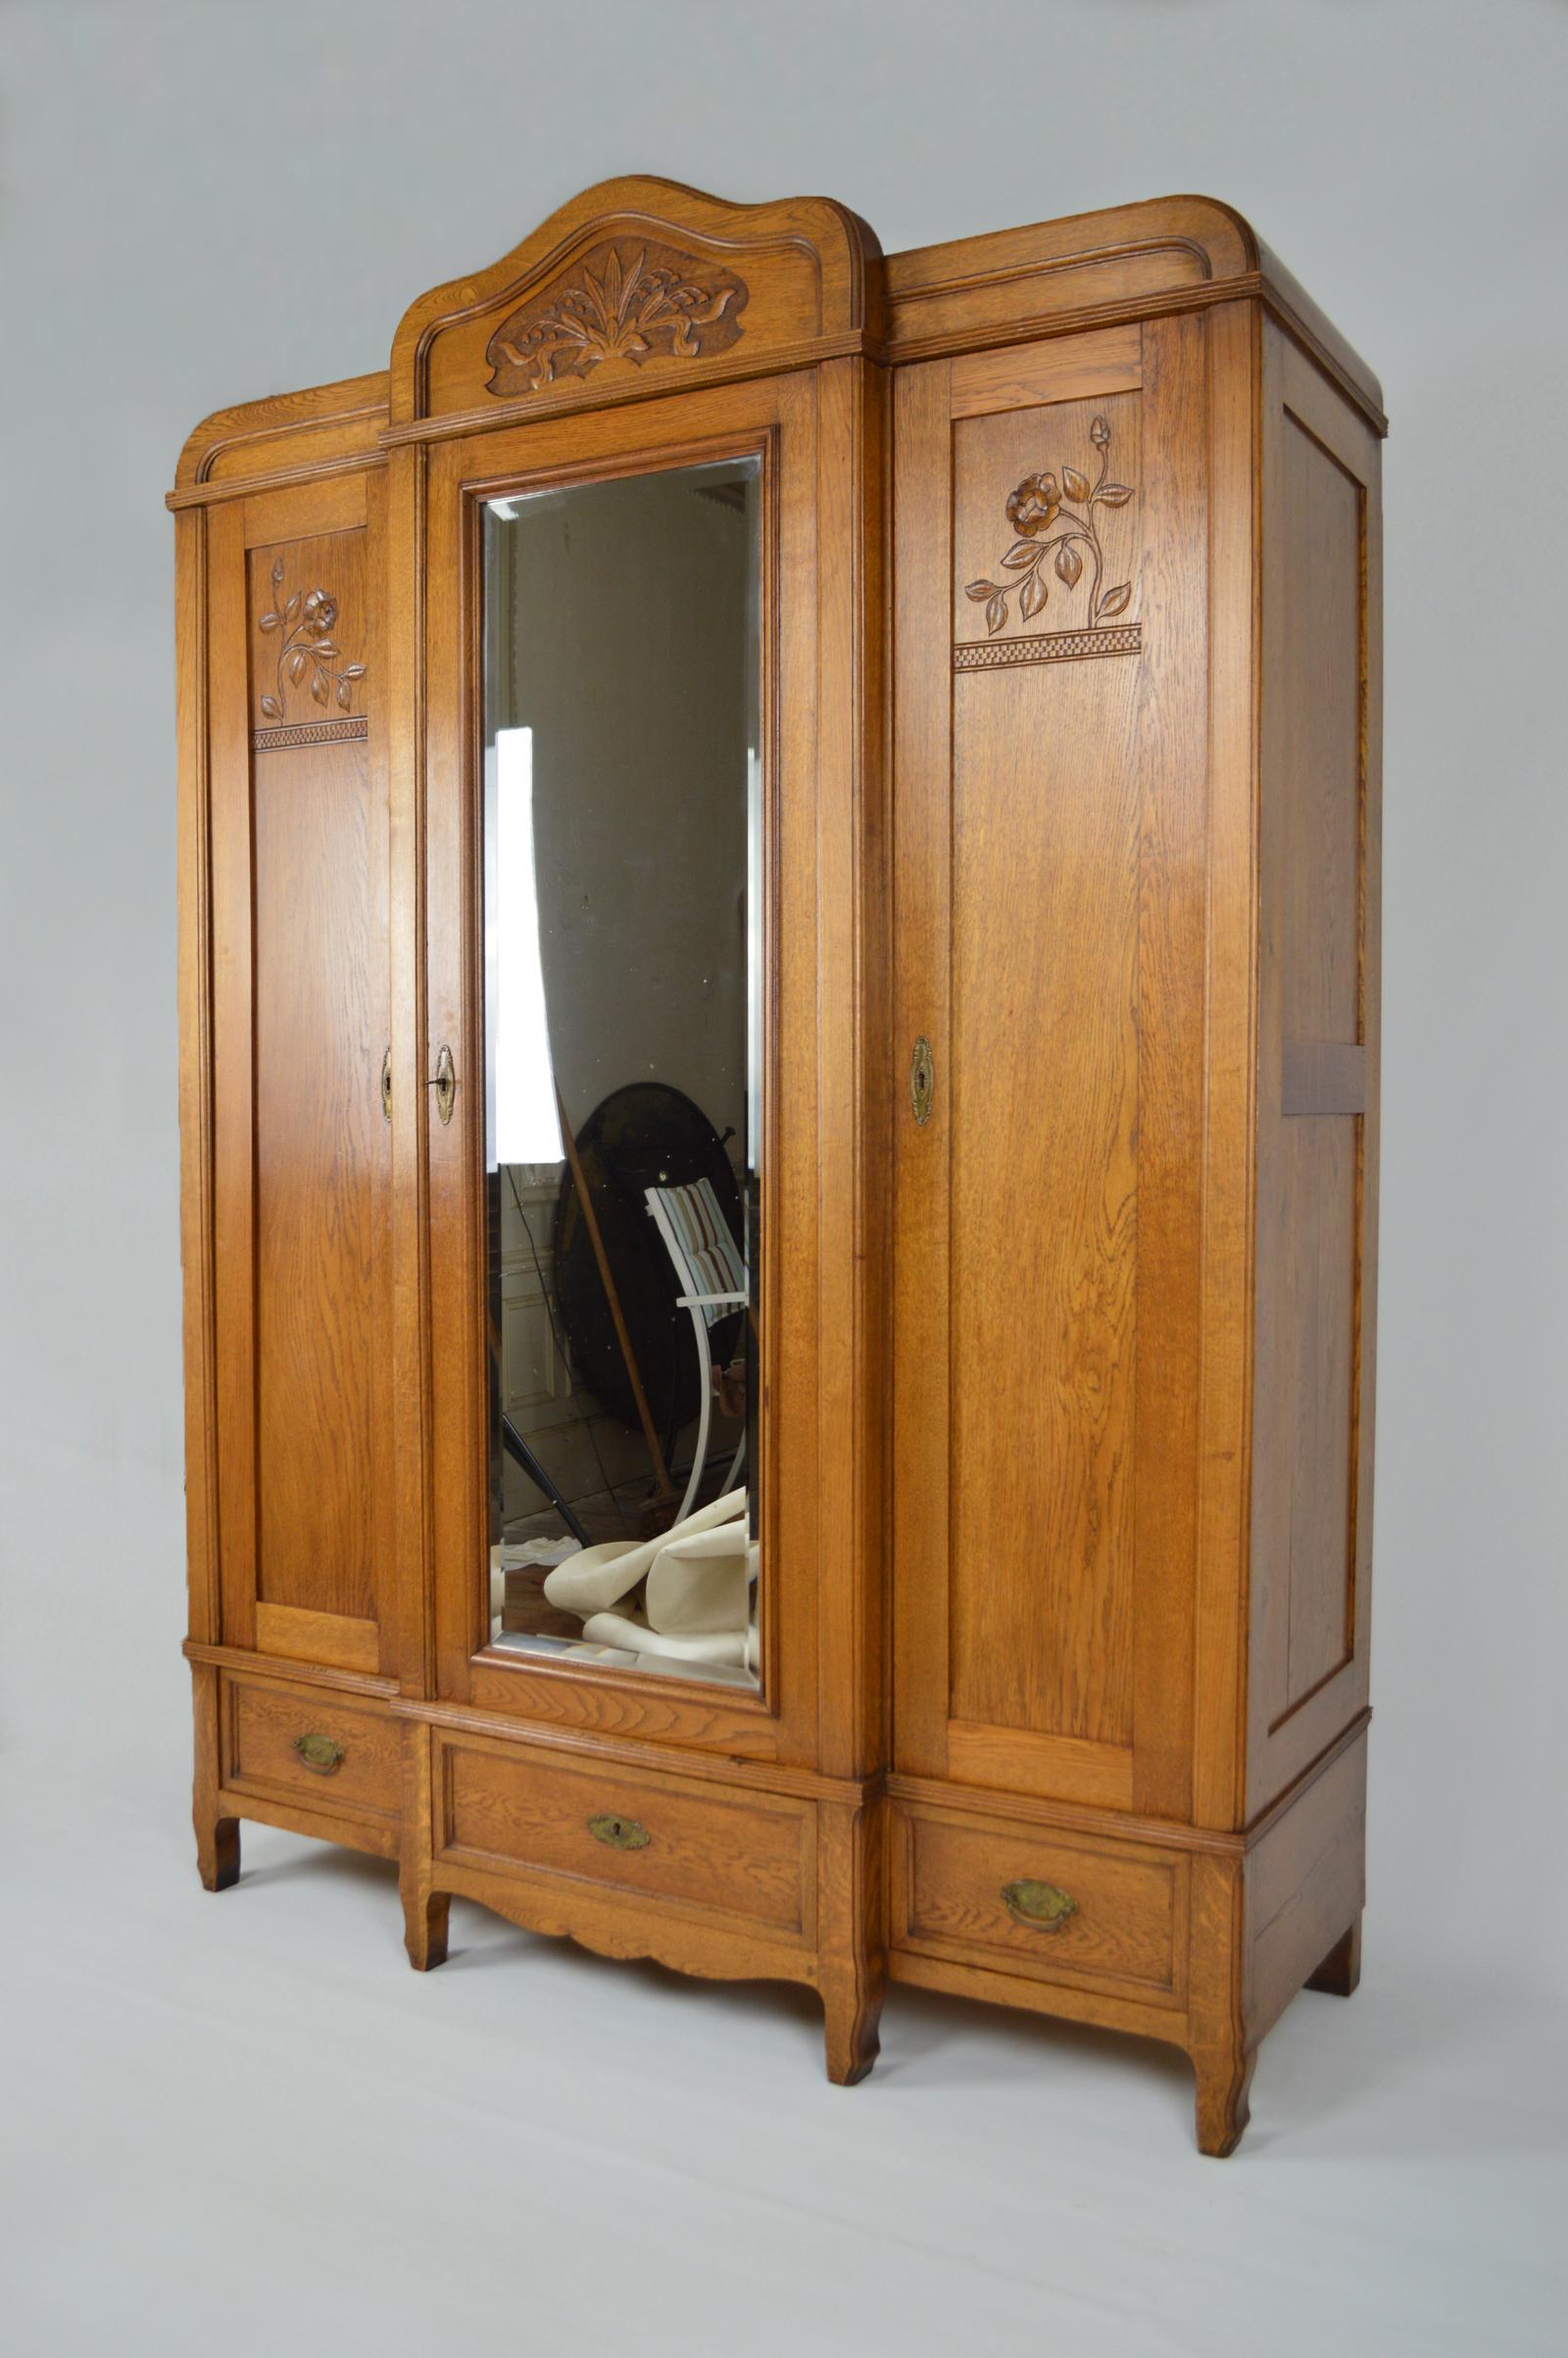 Wonderful Art Nouveau twin beds bedroom set of 3, in carved oak on a floral theme:
- 2 twin beds
- 1 wardrobe

In wonderful condition, wood treated against xylophages.

France, circa 1910.

Measures: Beds: 
Height 123 cm / 100 cm, depth 194